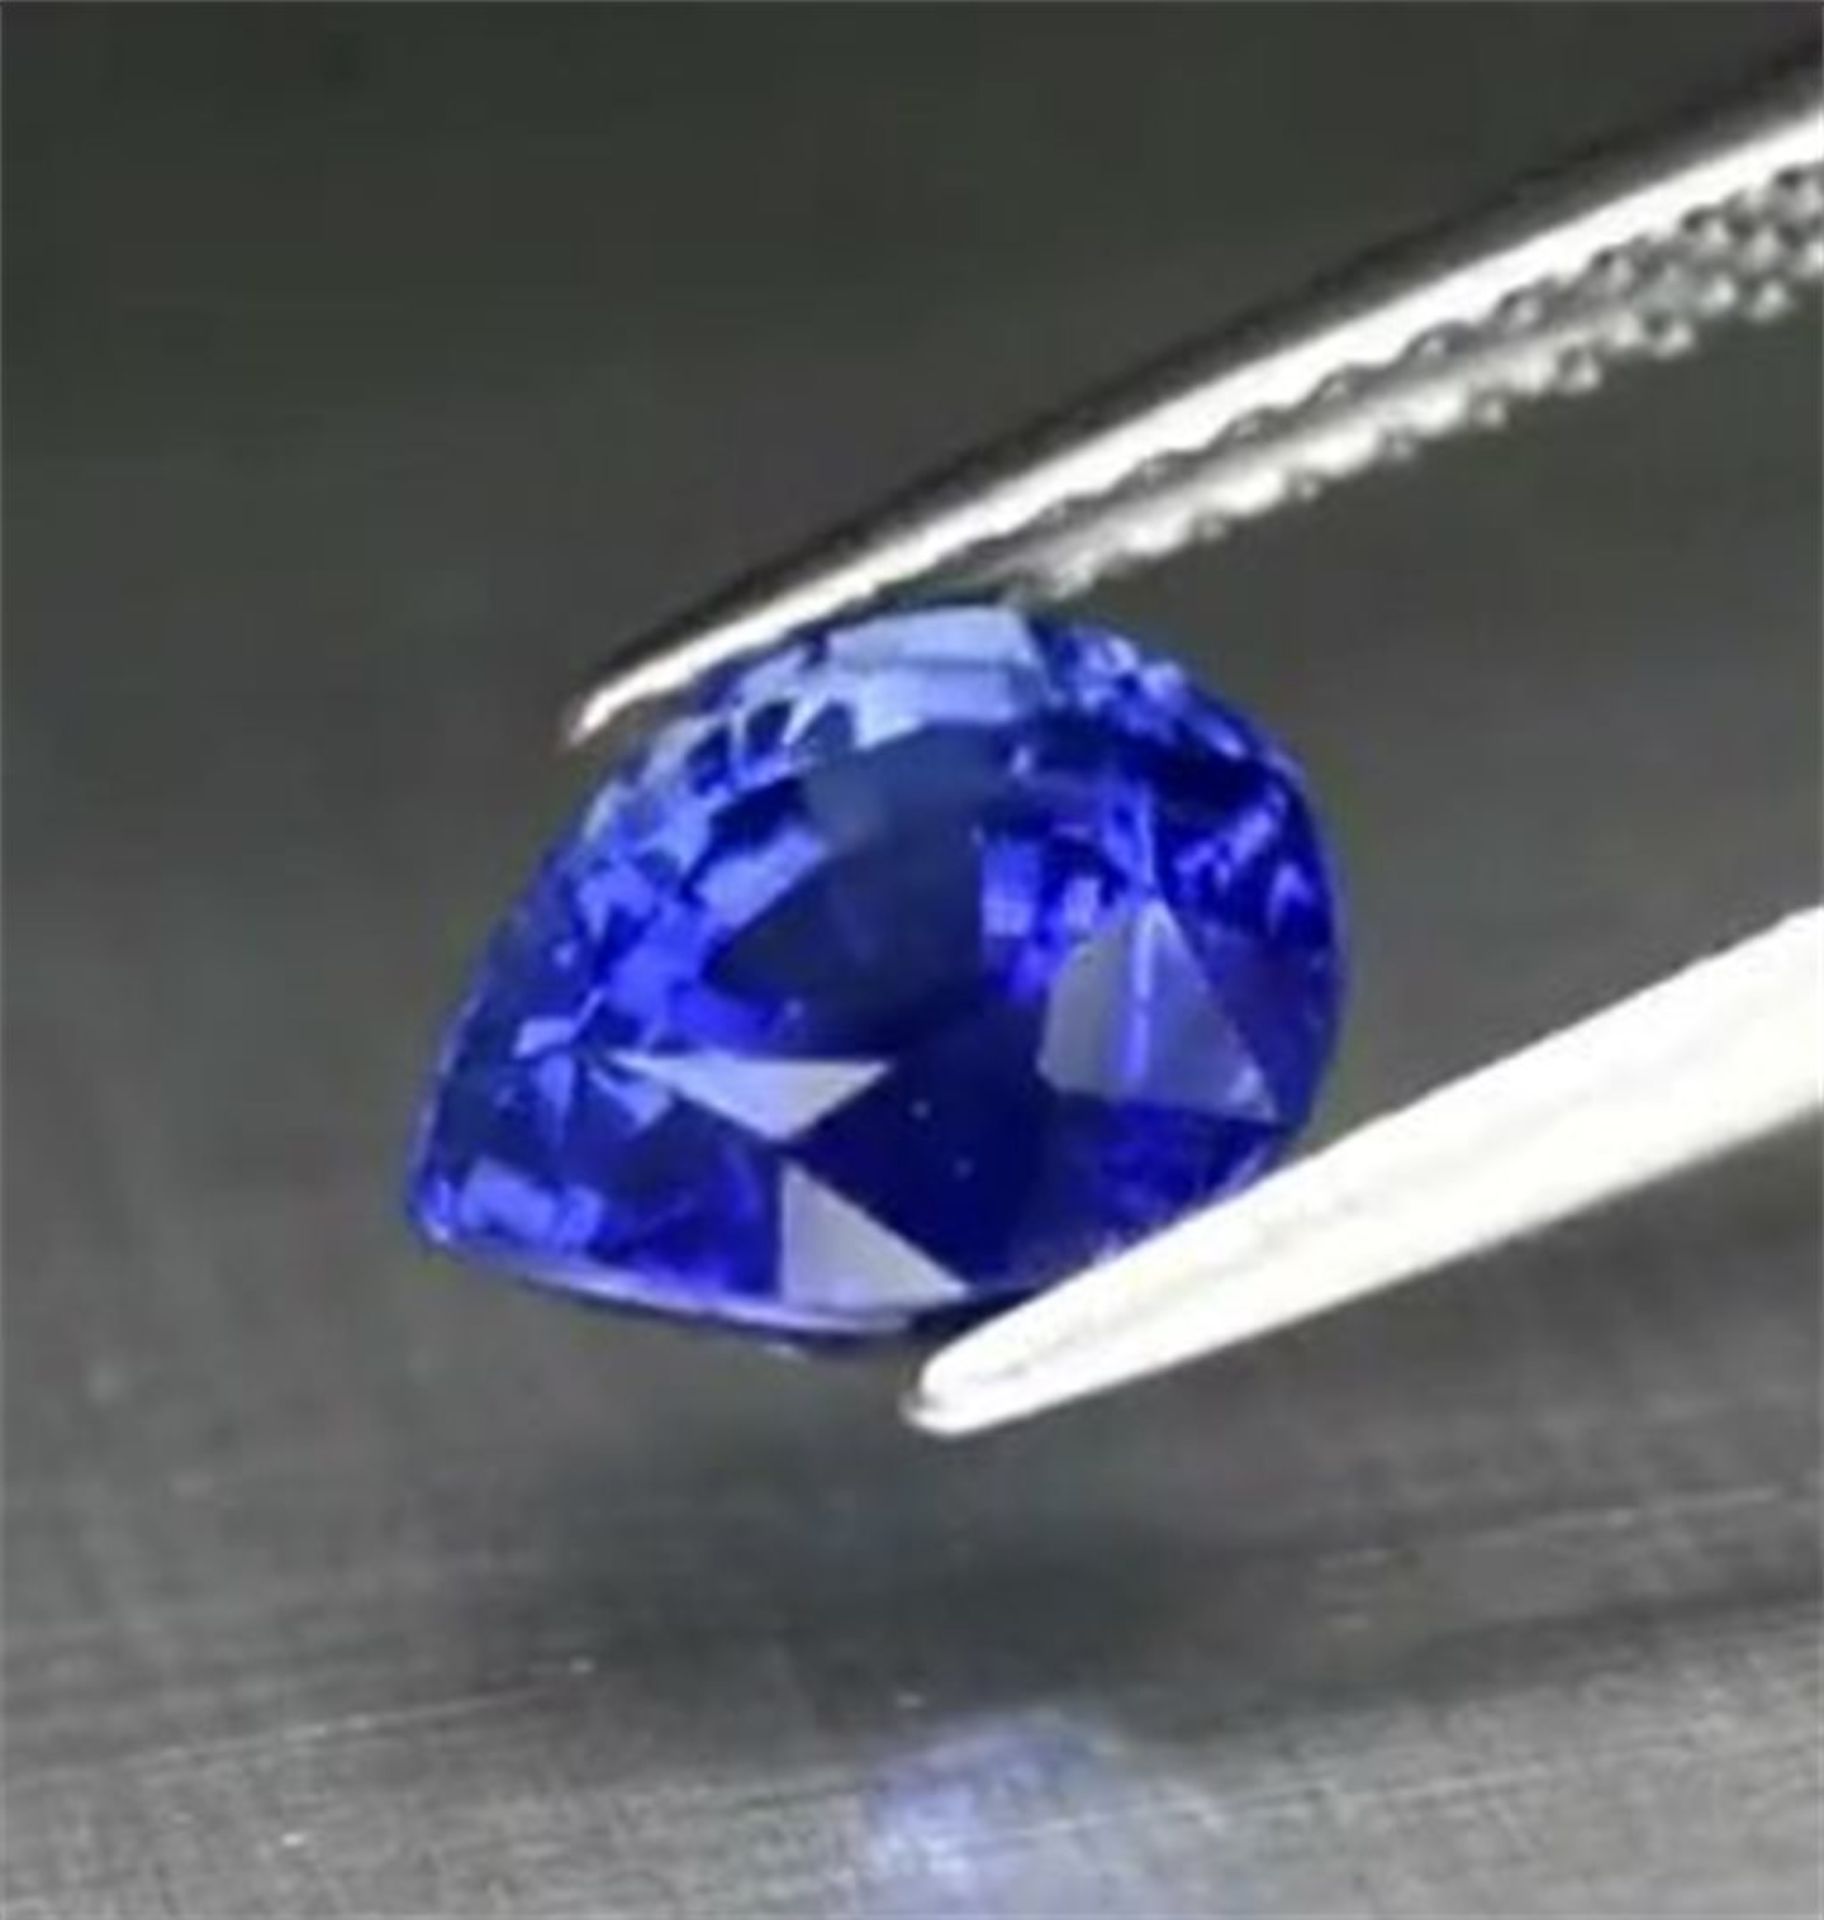 GIA Certified 2.24 ct. Blue Sapphire MADAGASCAR - Image 4 of 10